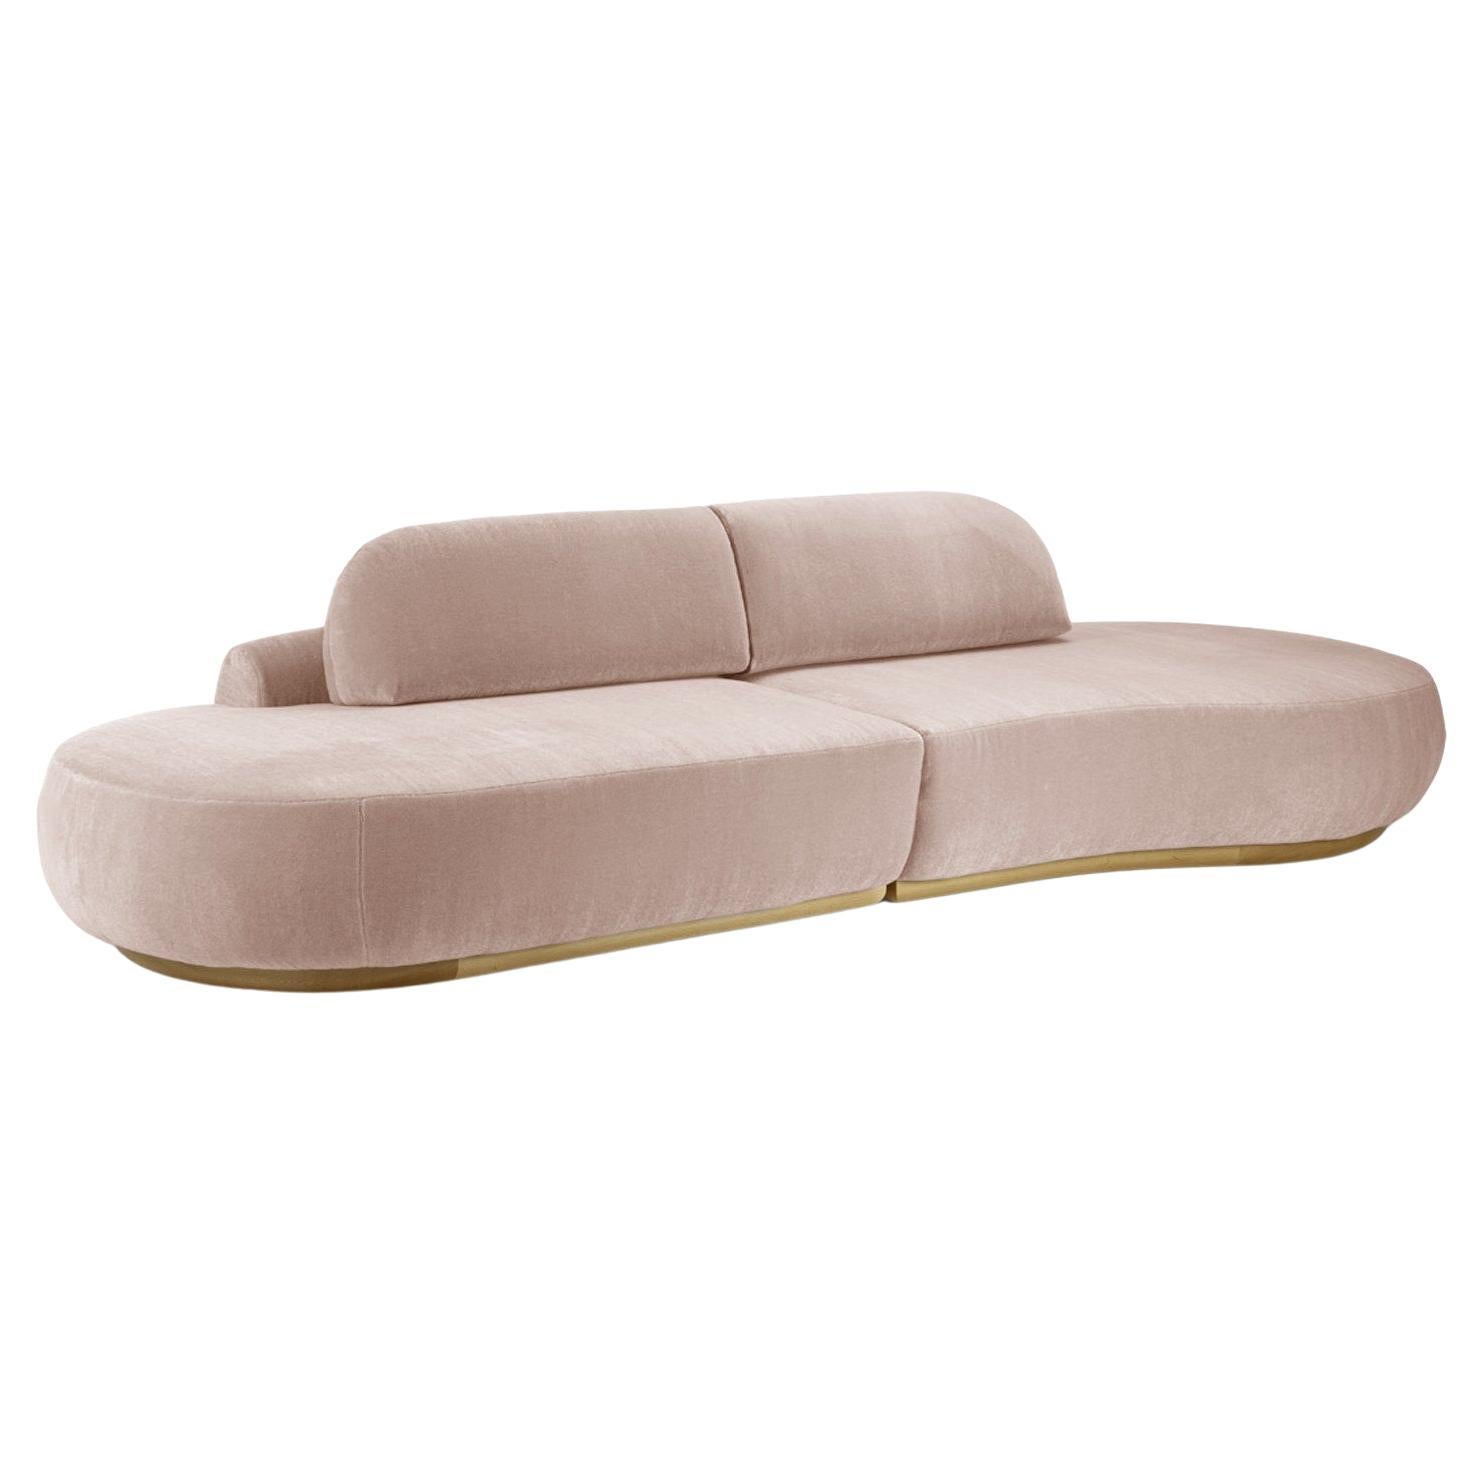 Naked Curved Sectional Sofa, 2 Piece with Natural Oak and Vigo Blossom